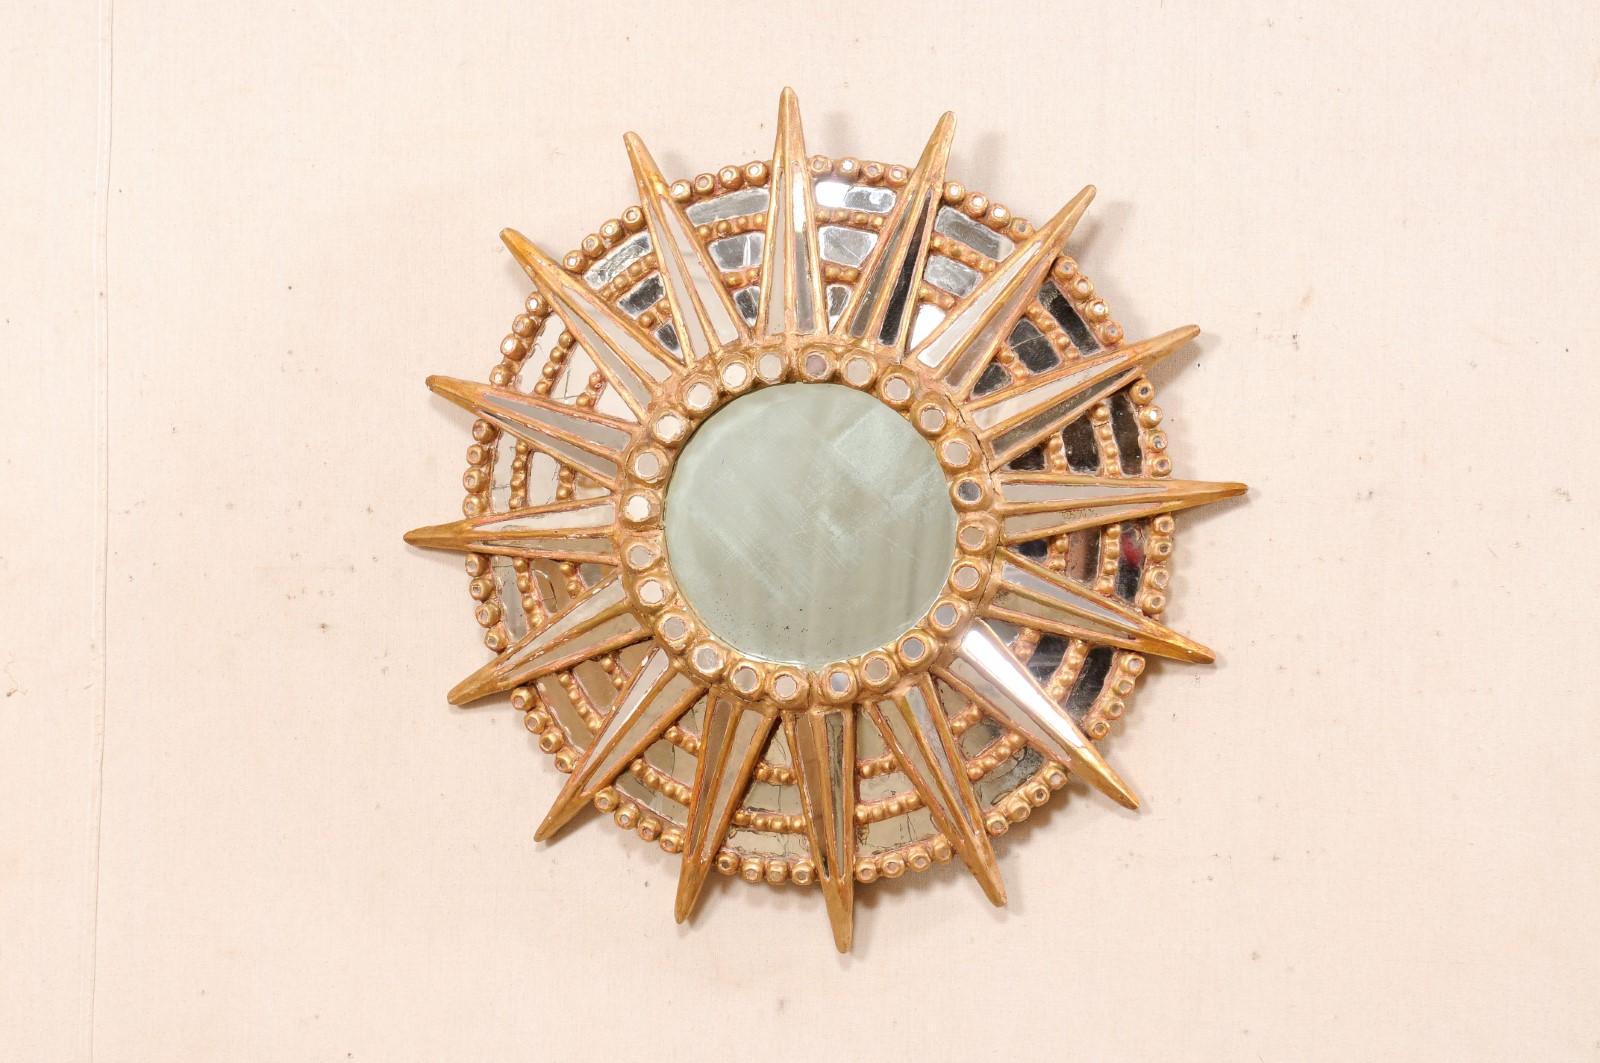 A Spanish round-shaped mirror with large sun motif at center, from the mid 20th century. This mid-century wall decoration from Spain features a sun-shaped design with a round glass/mirror at its center, framed within a series of stacked/ circular